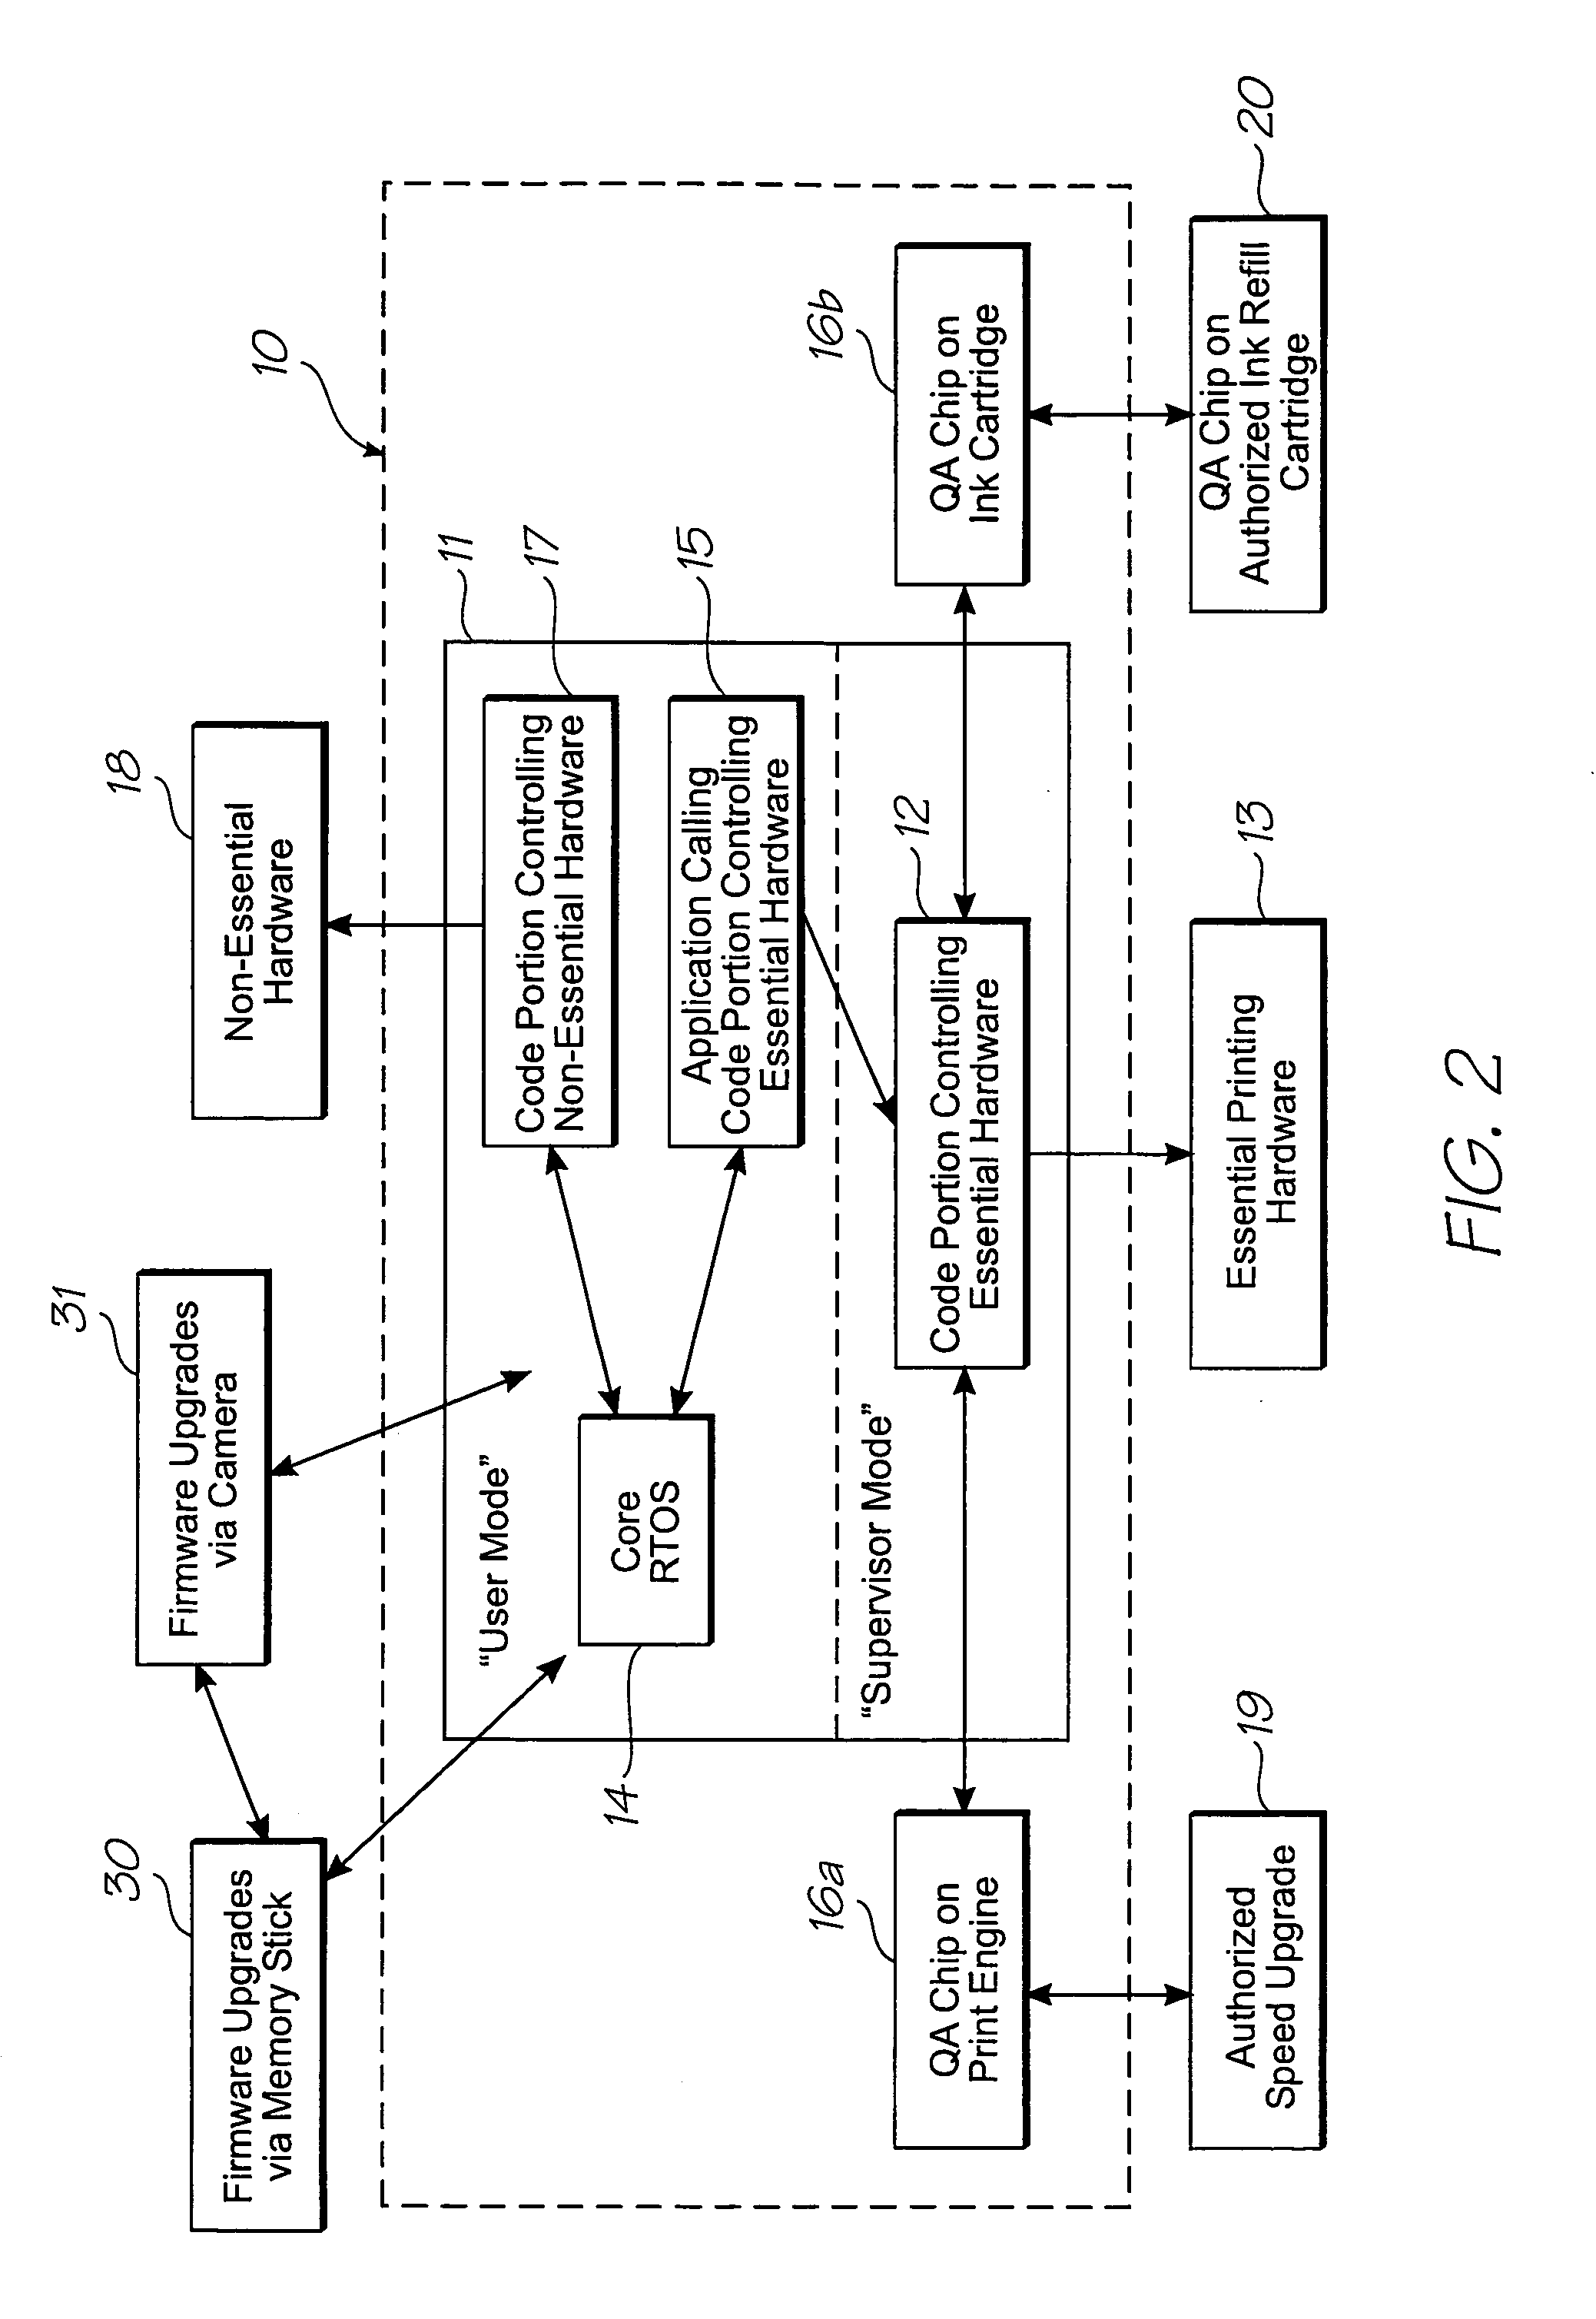 System for protecting sensitive data from user code in register window architecture